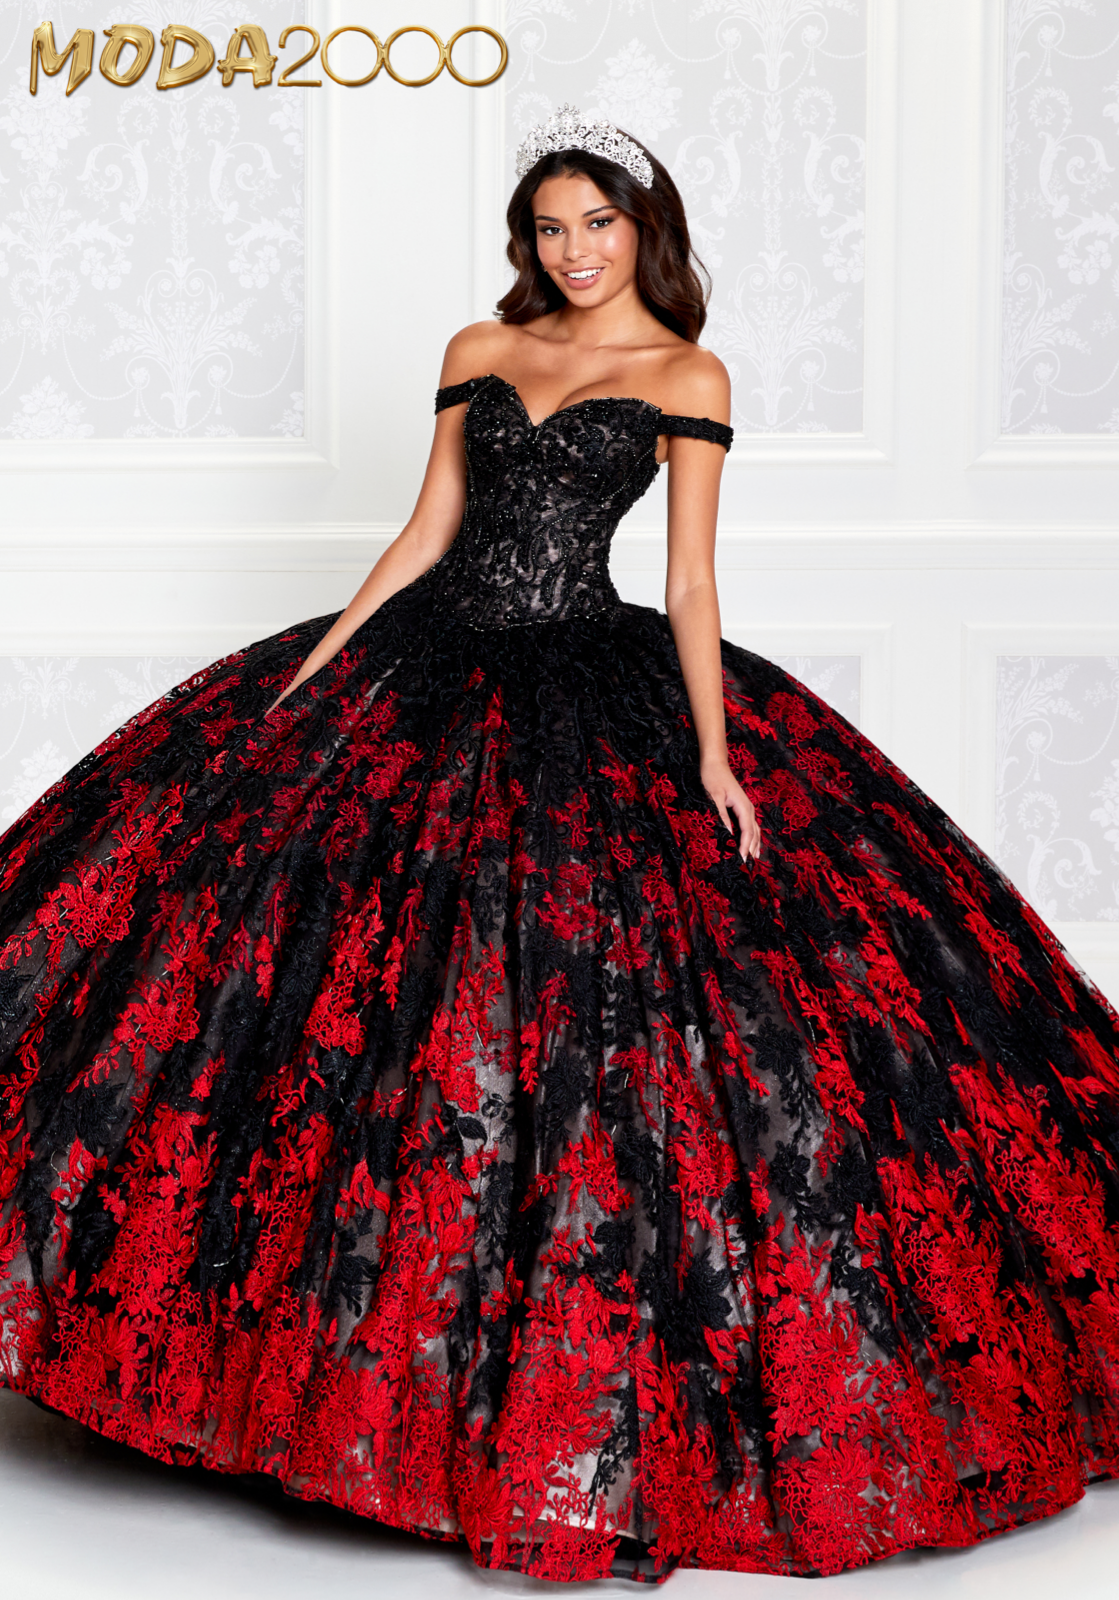 red and black quinceanera dresses